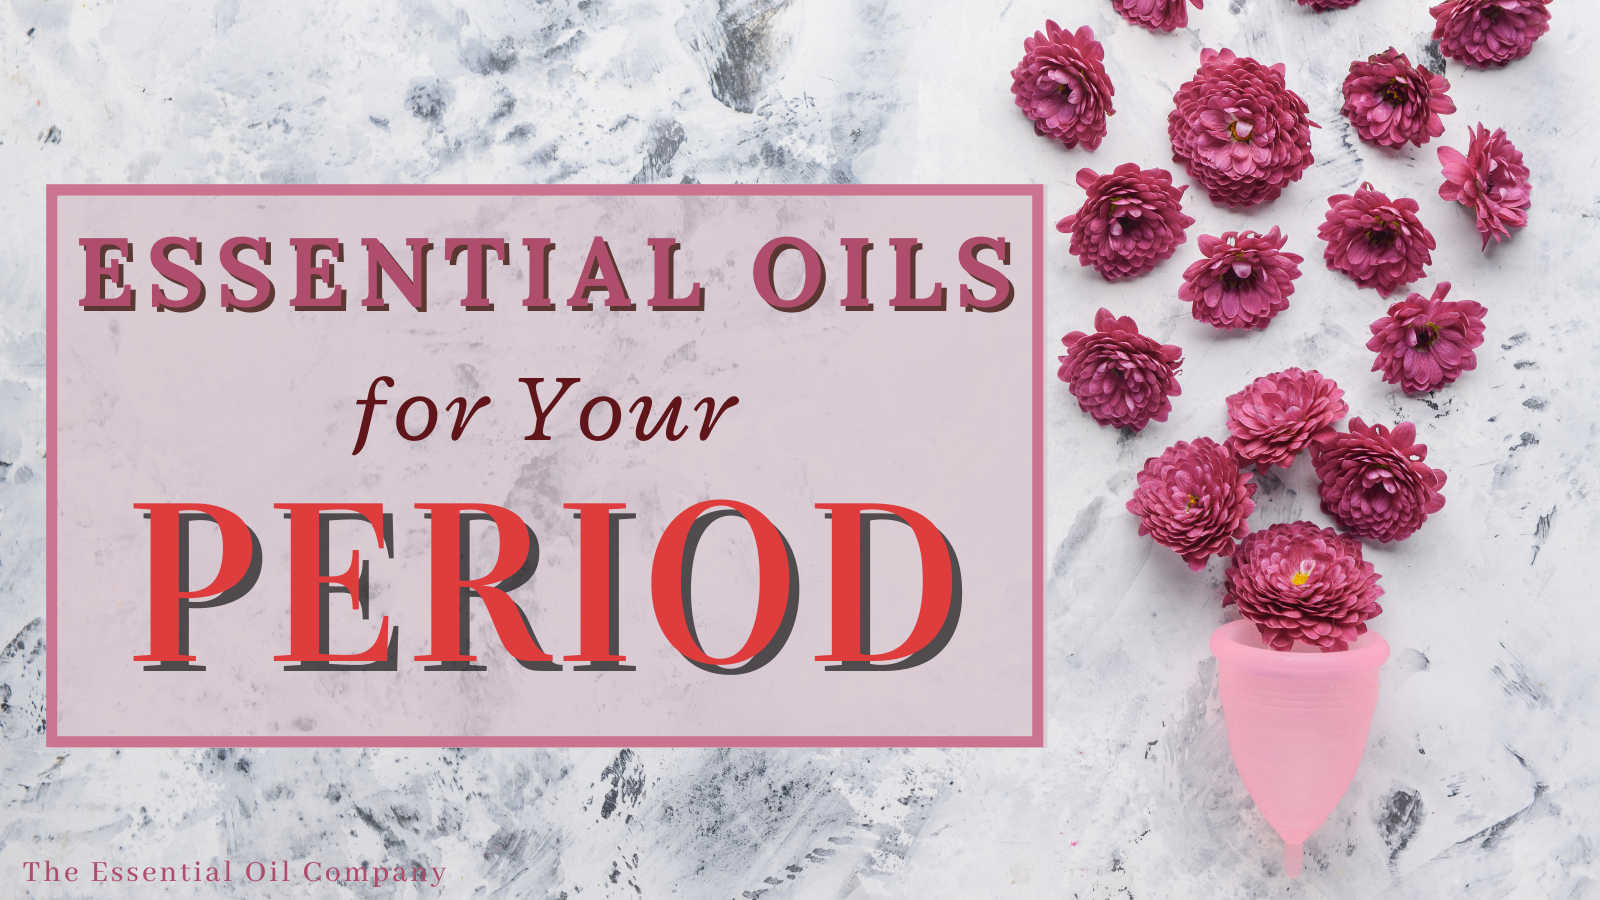 Essential Oils for Your Period